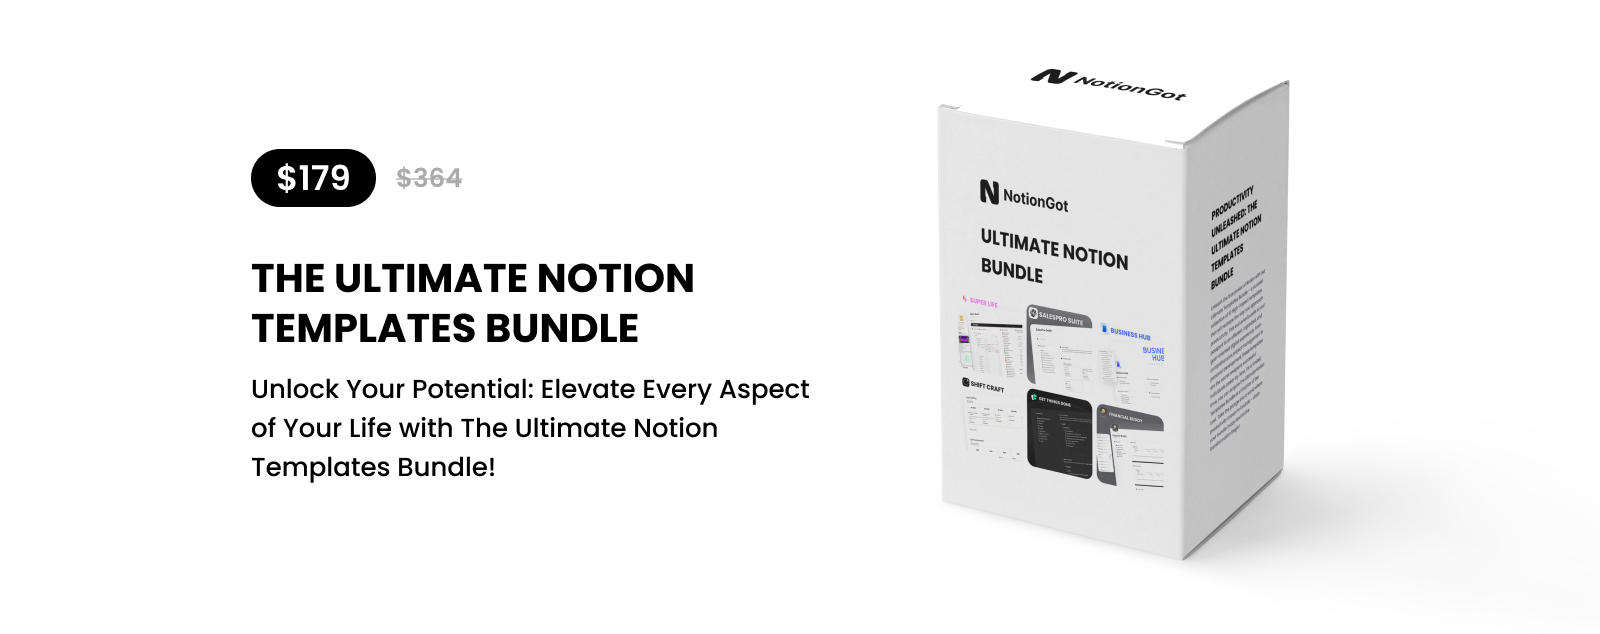 The Ultimate Notion Templates Bundle